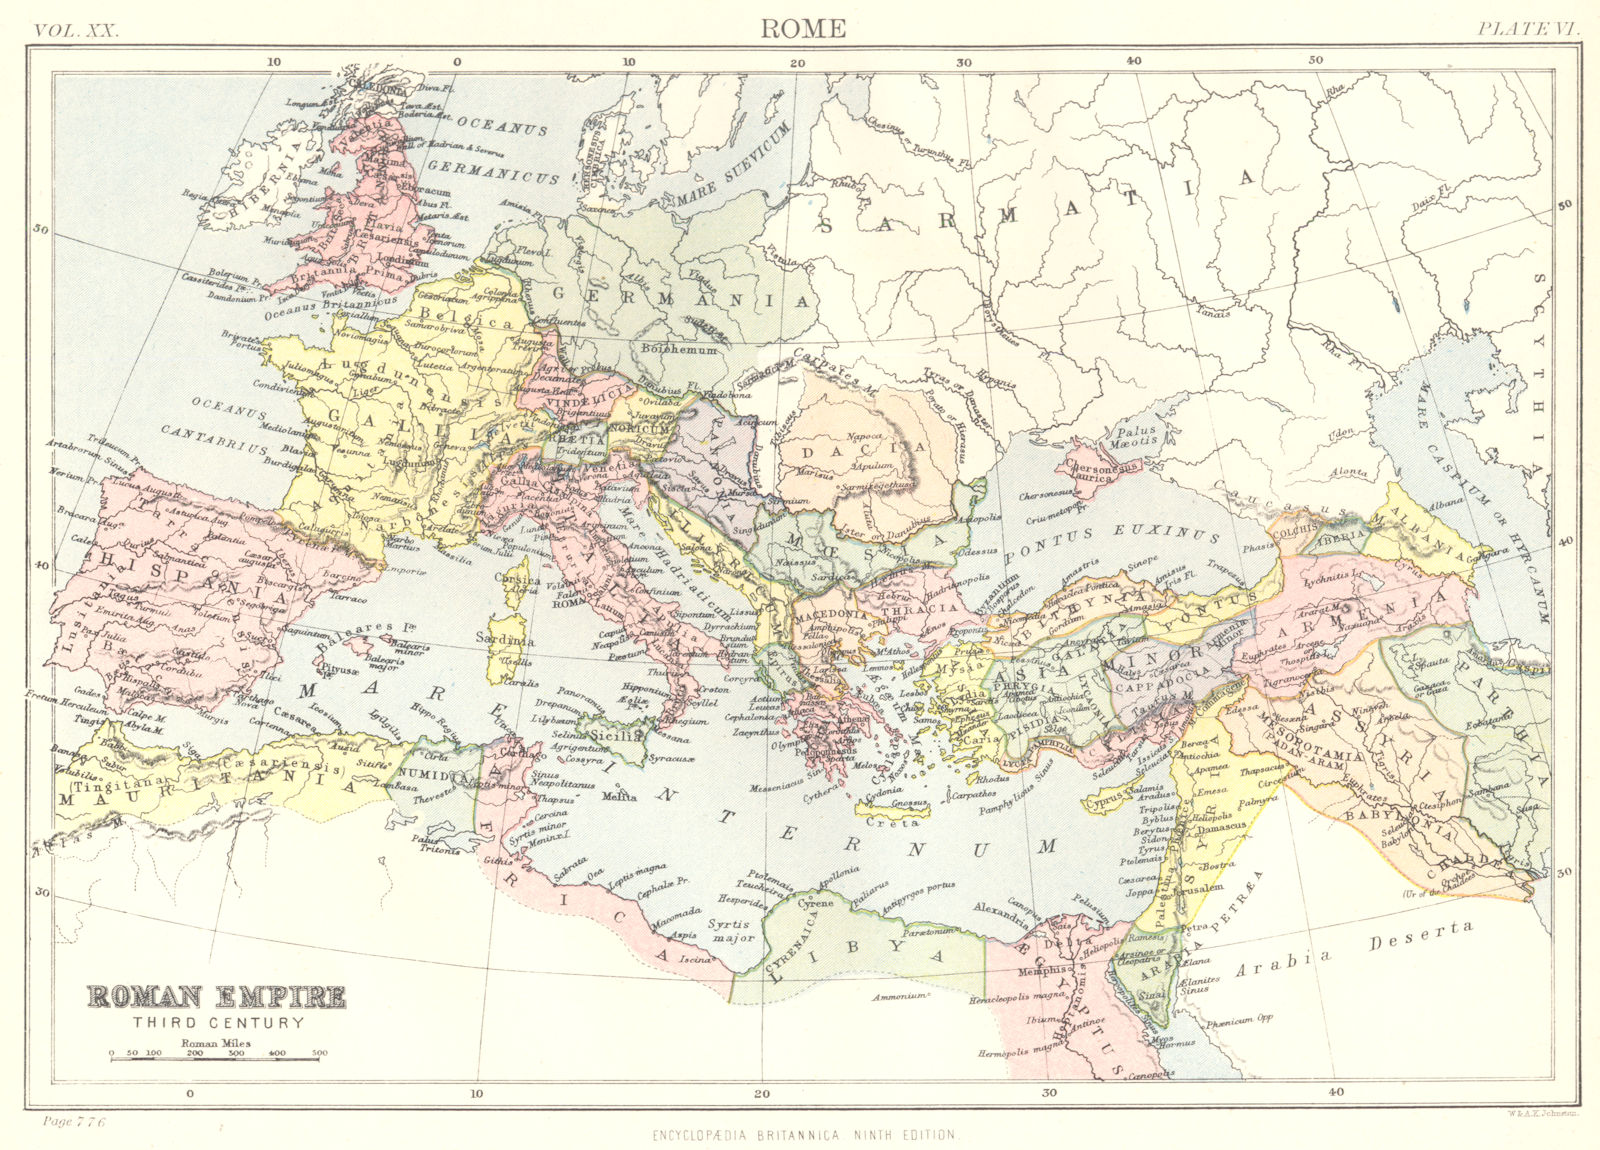 Associate Product ROMAN EMPIRE. In the third century. Britannica 9th edition 1898 old map